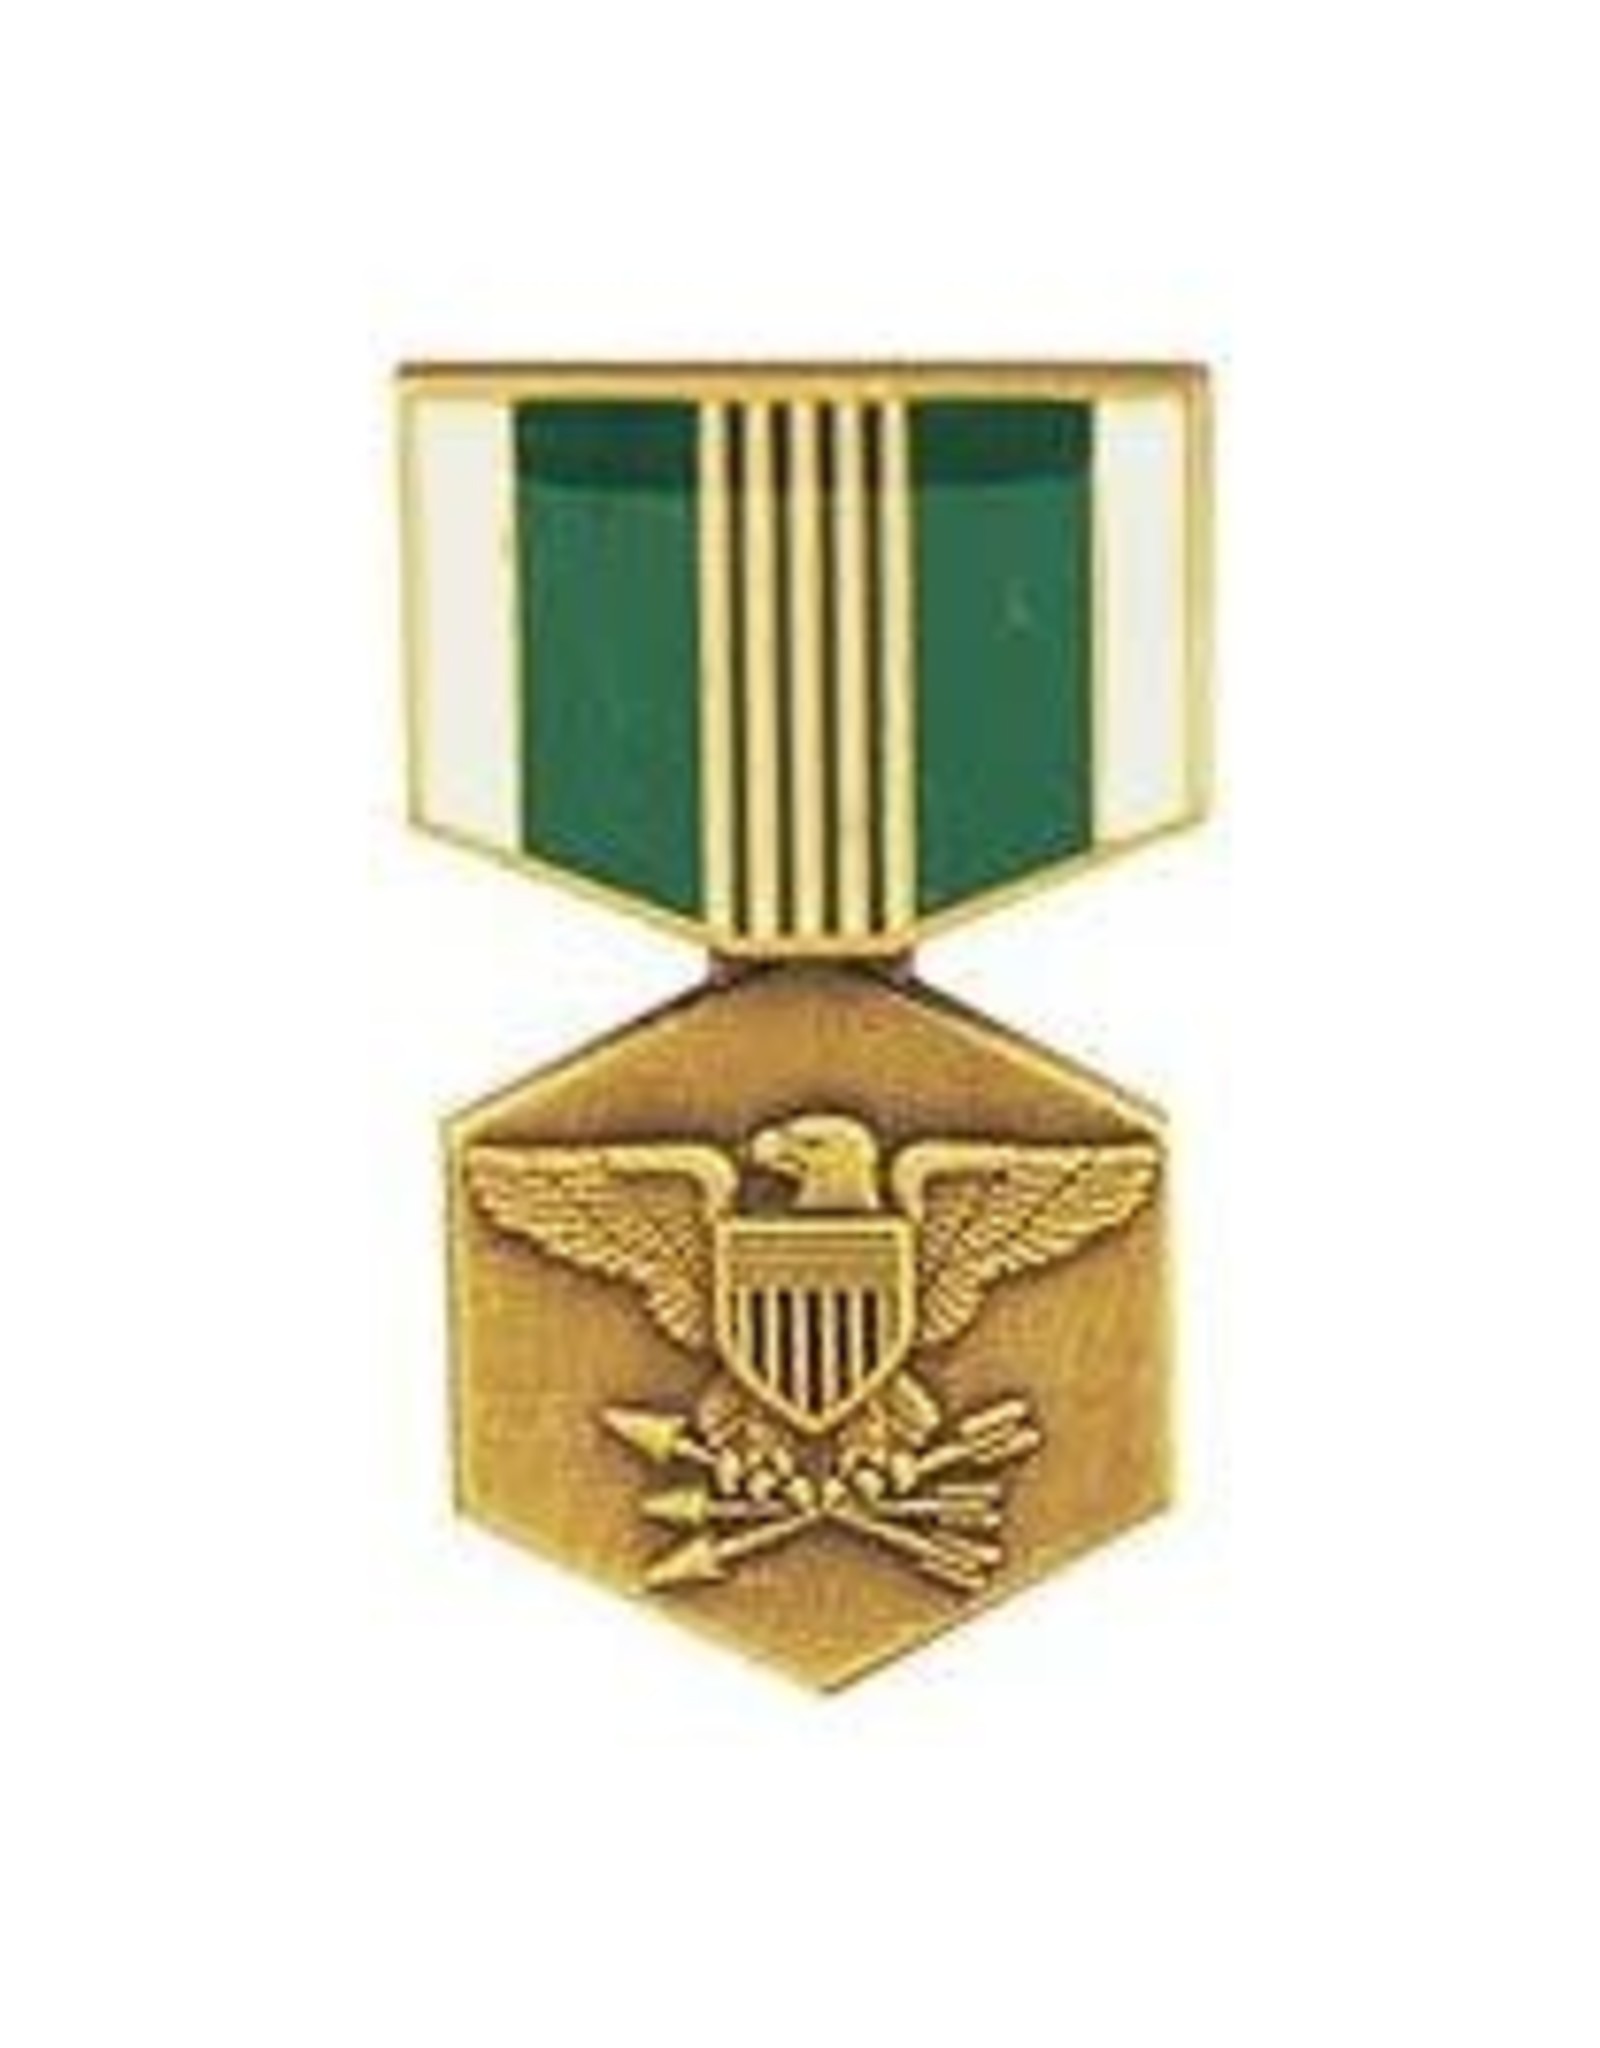 Pin - Medal Army Commendation